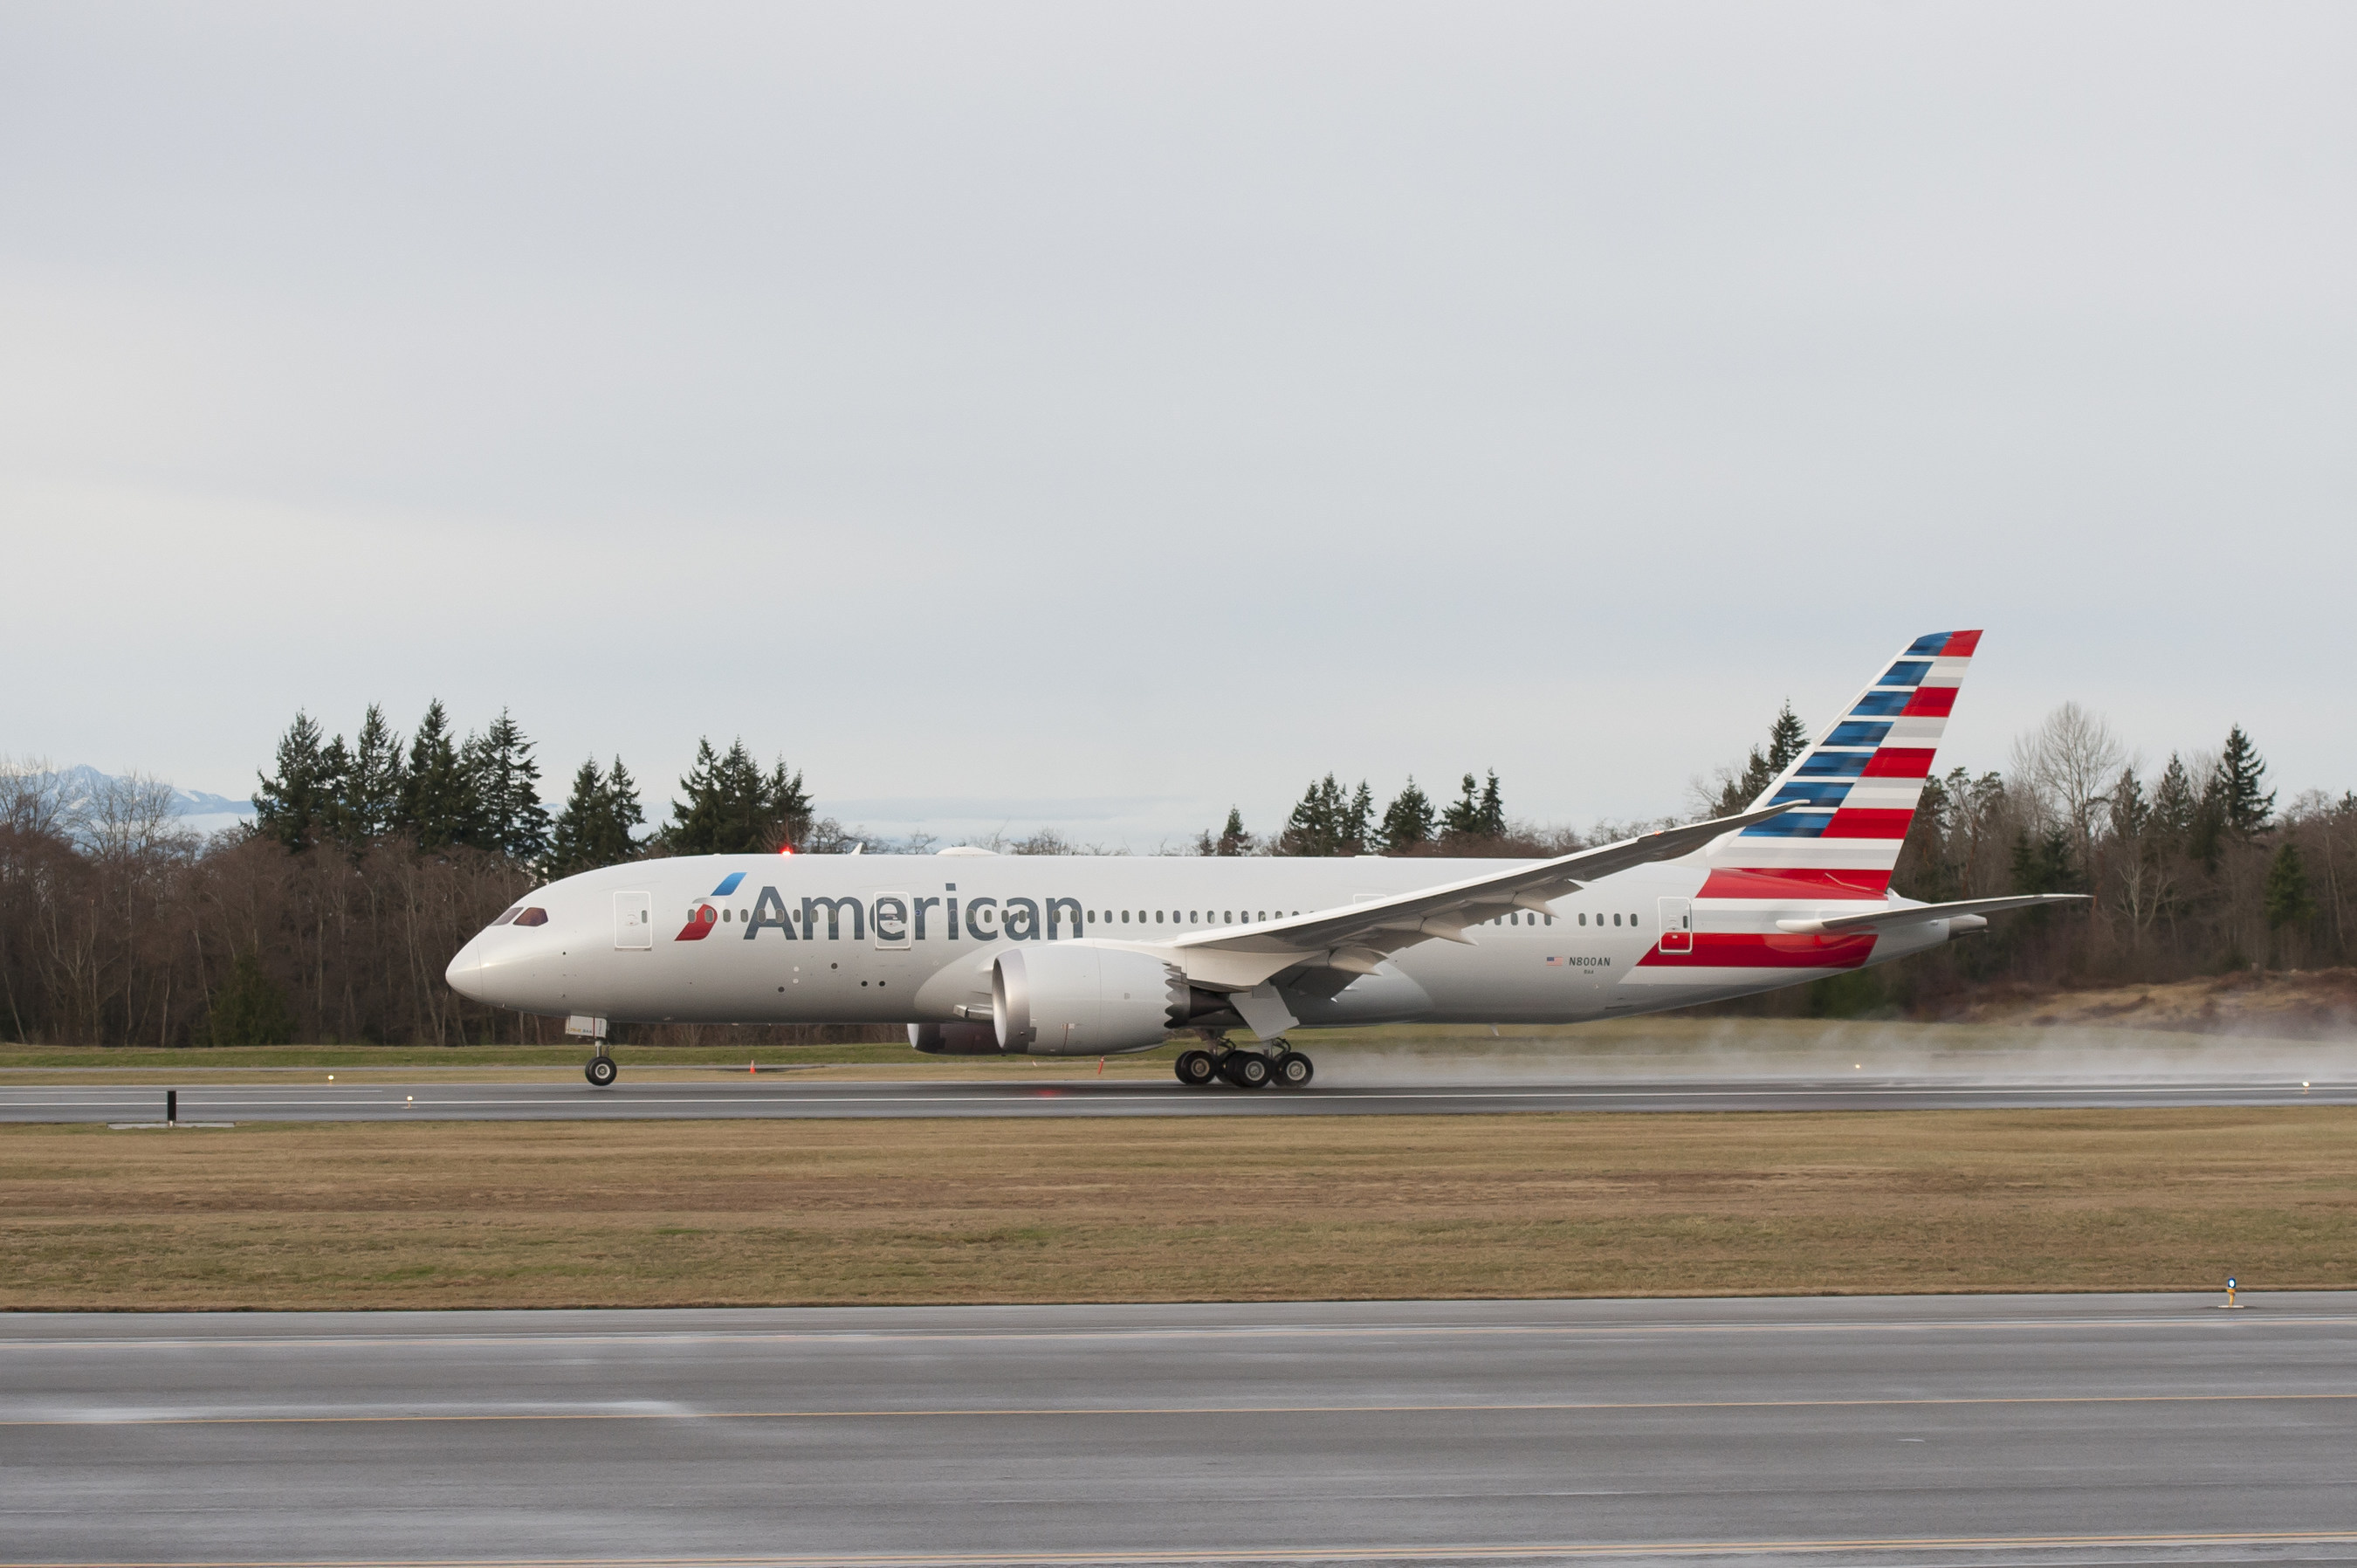 American's first Boeing 787 Dreamliner departing on its maiden test flight on Jan. 6, 2015.